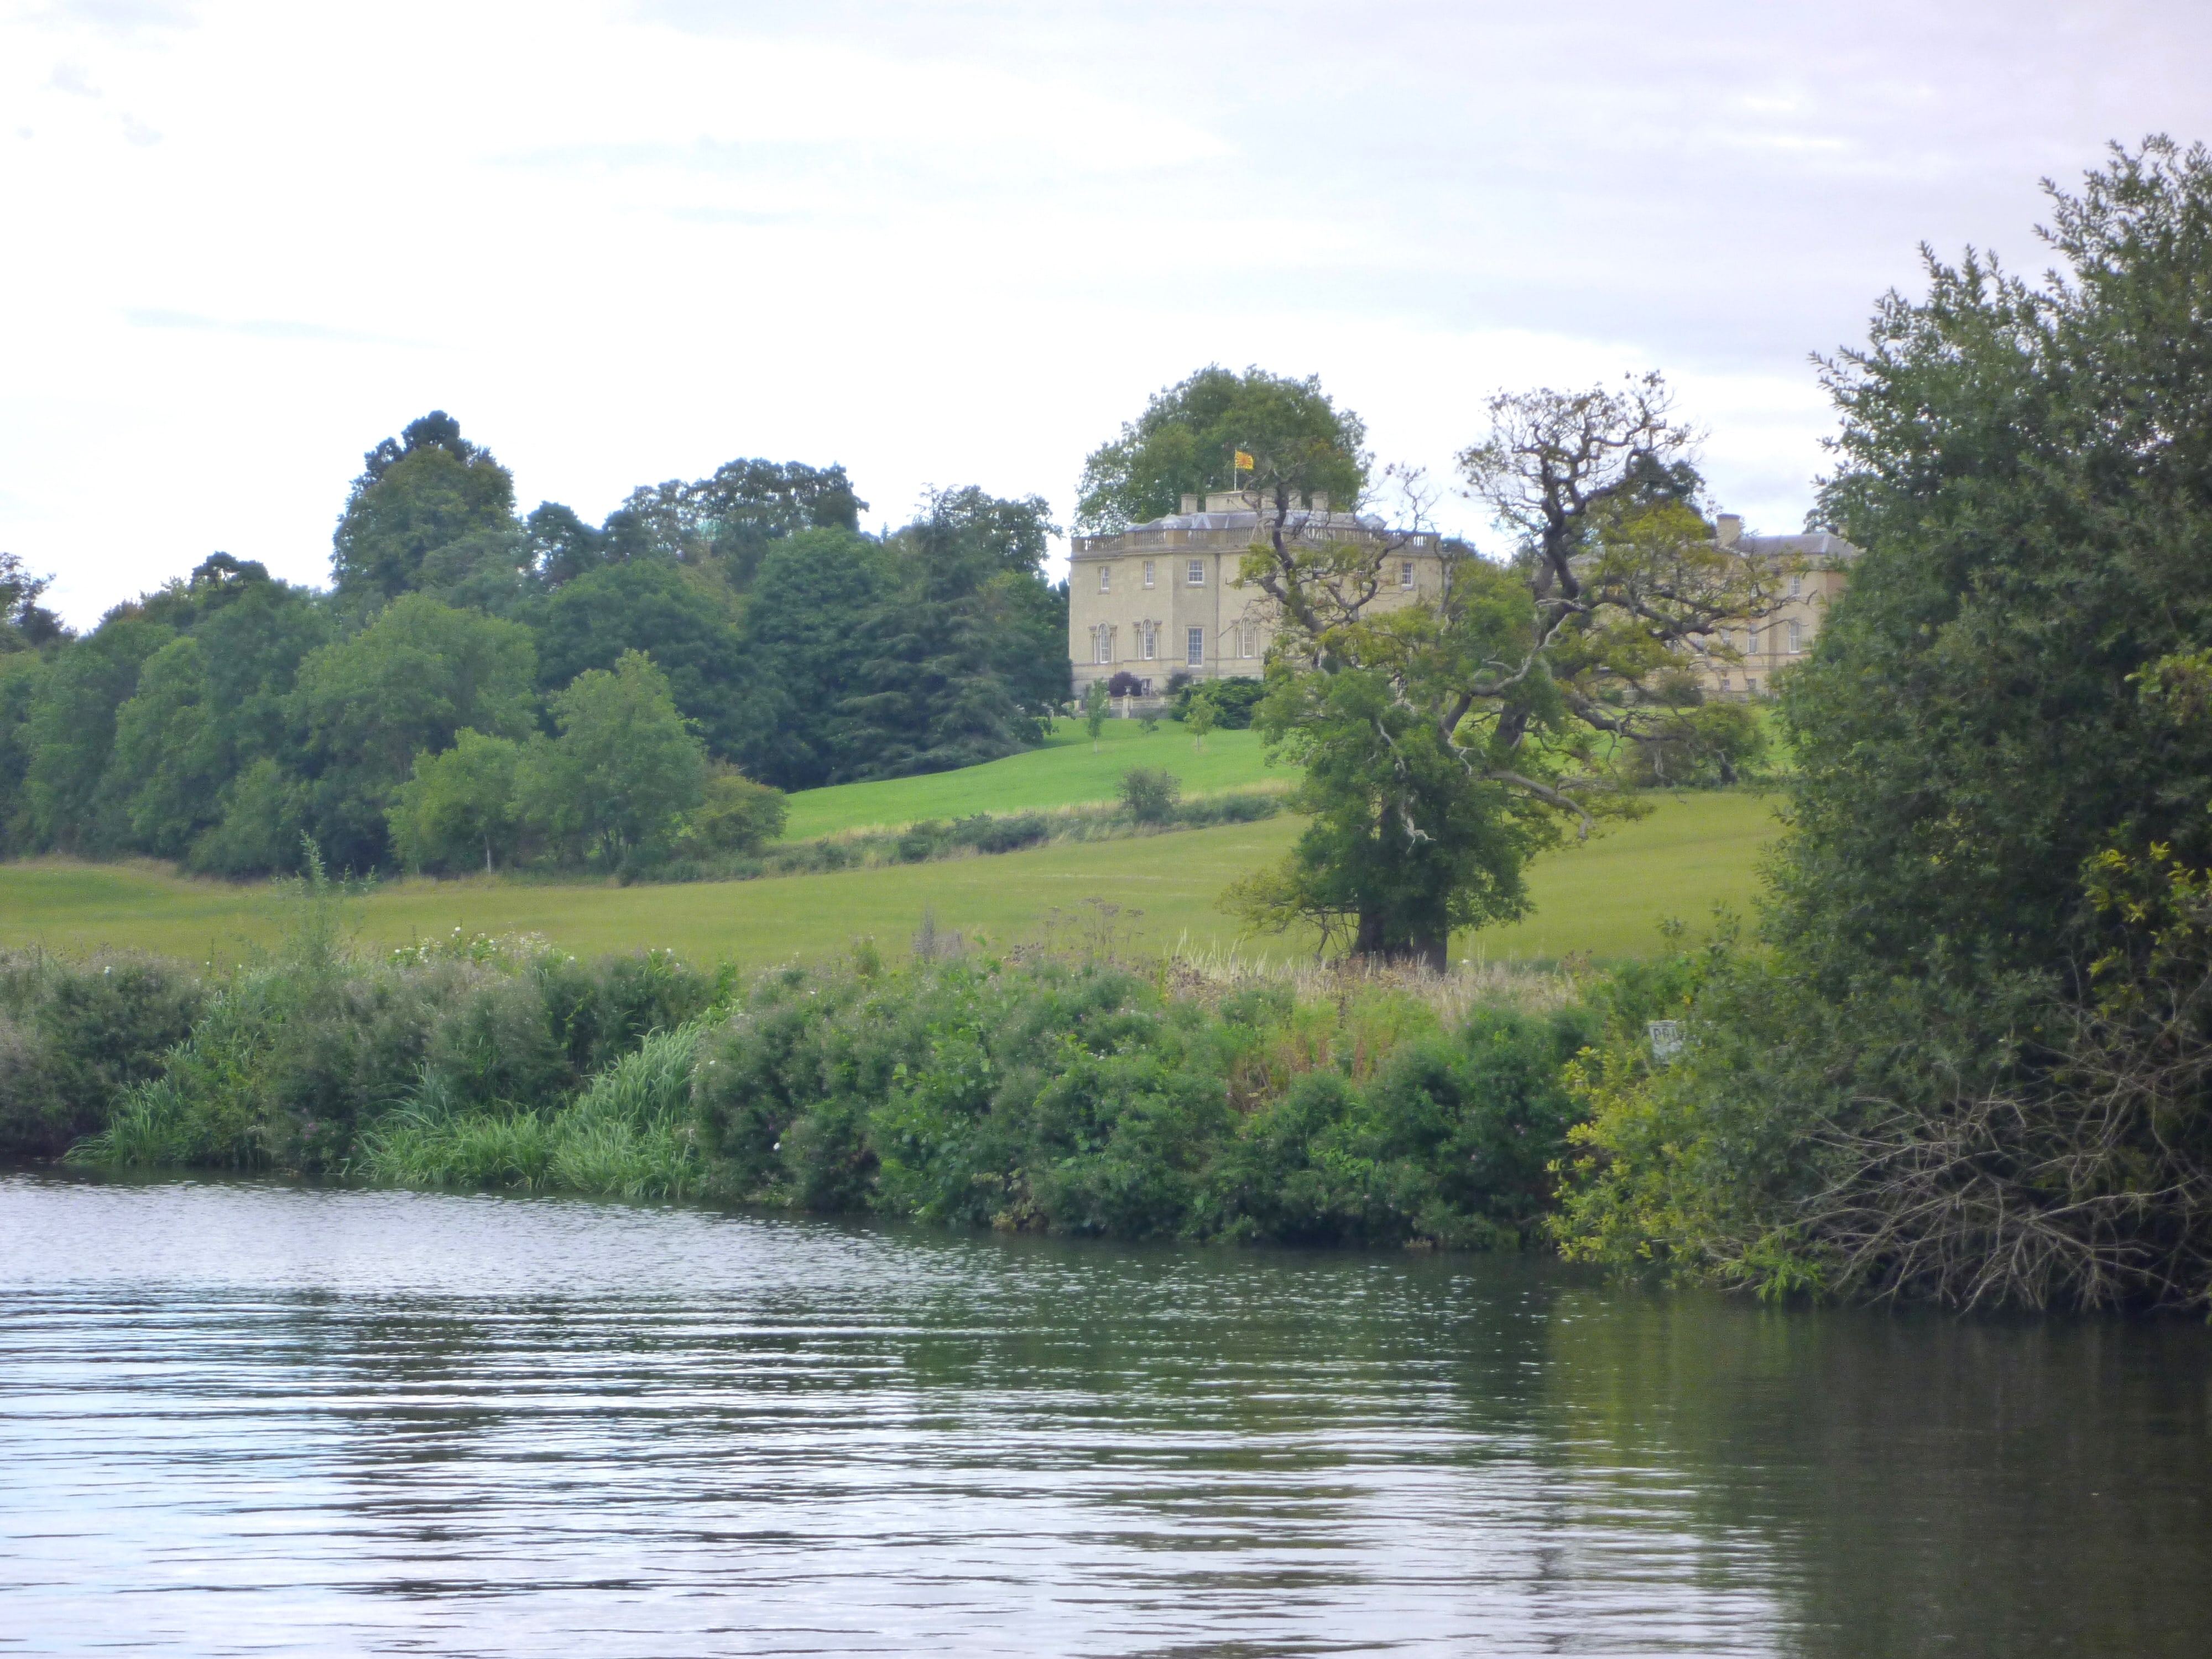 A view of Nunenham House from the Thames